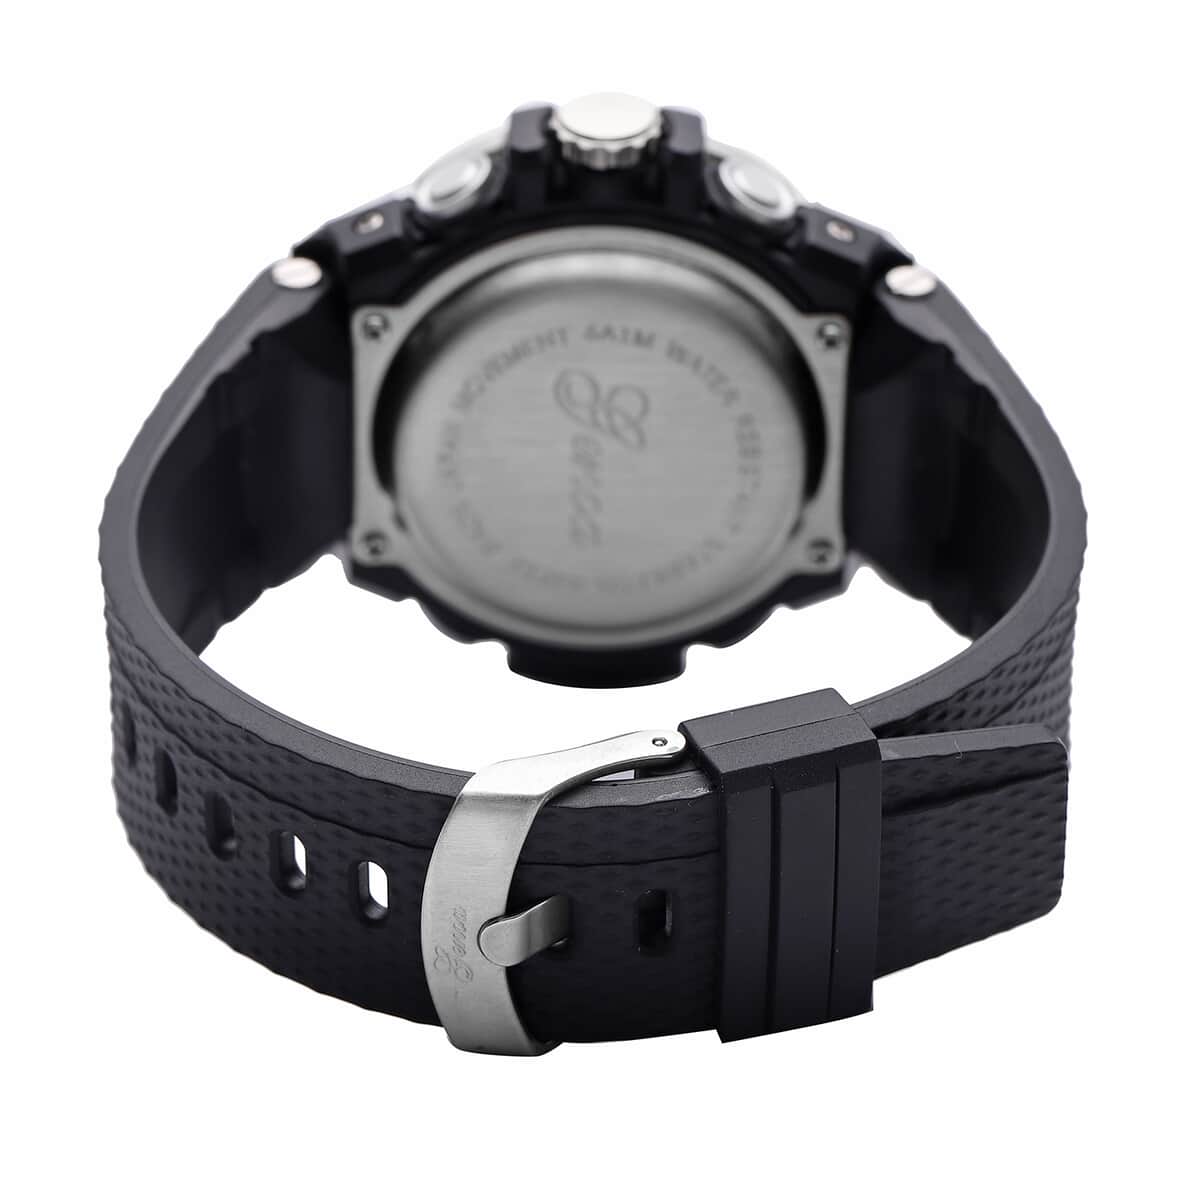 Genoa Japanese and Electronic Movement Multifunctional Key Watch in Black Silicone Strap (48 mm) image number 4